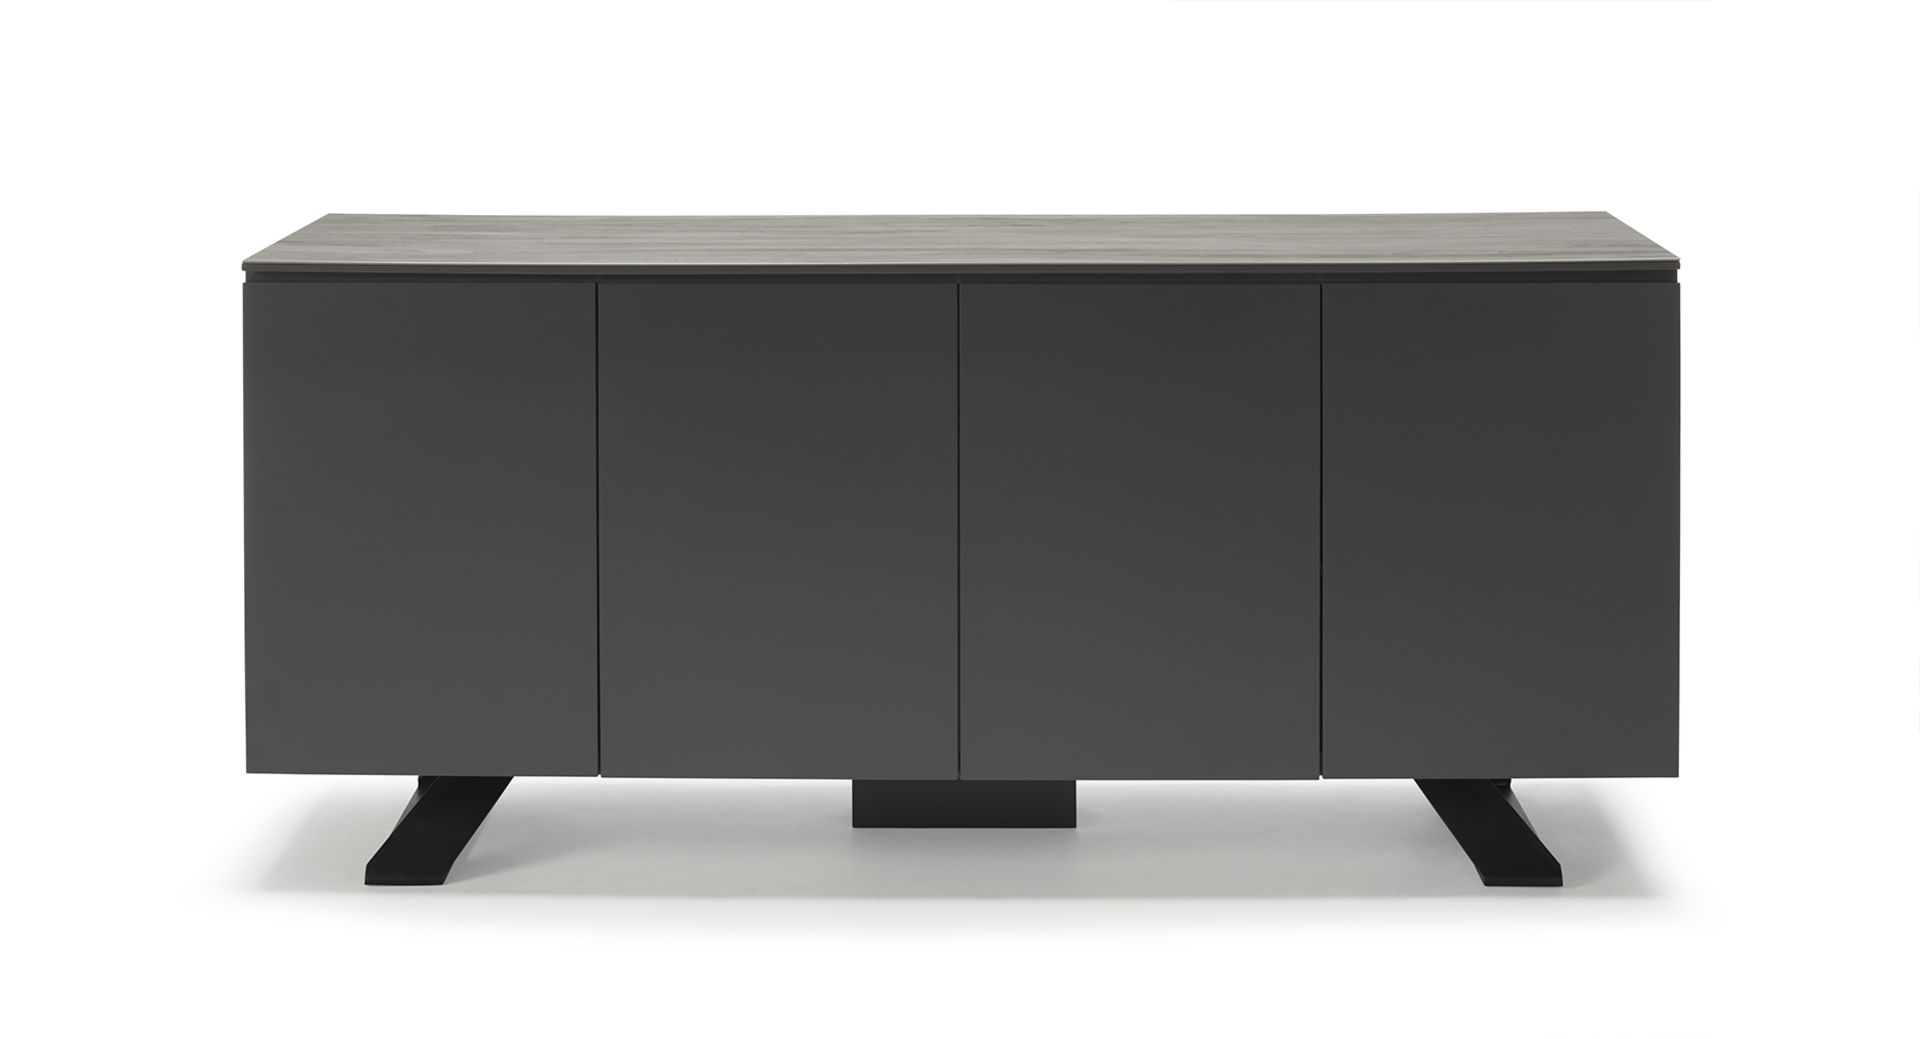 Spartan Sideboard by Kesterport The Spartan Four Door Sideboard provides is striking as a stand - Image 11 of 12